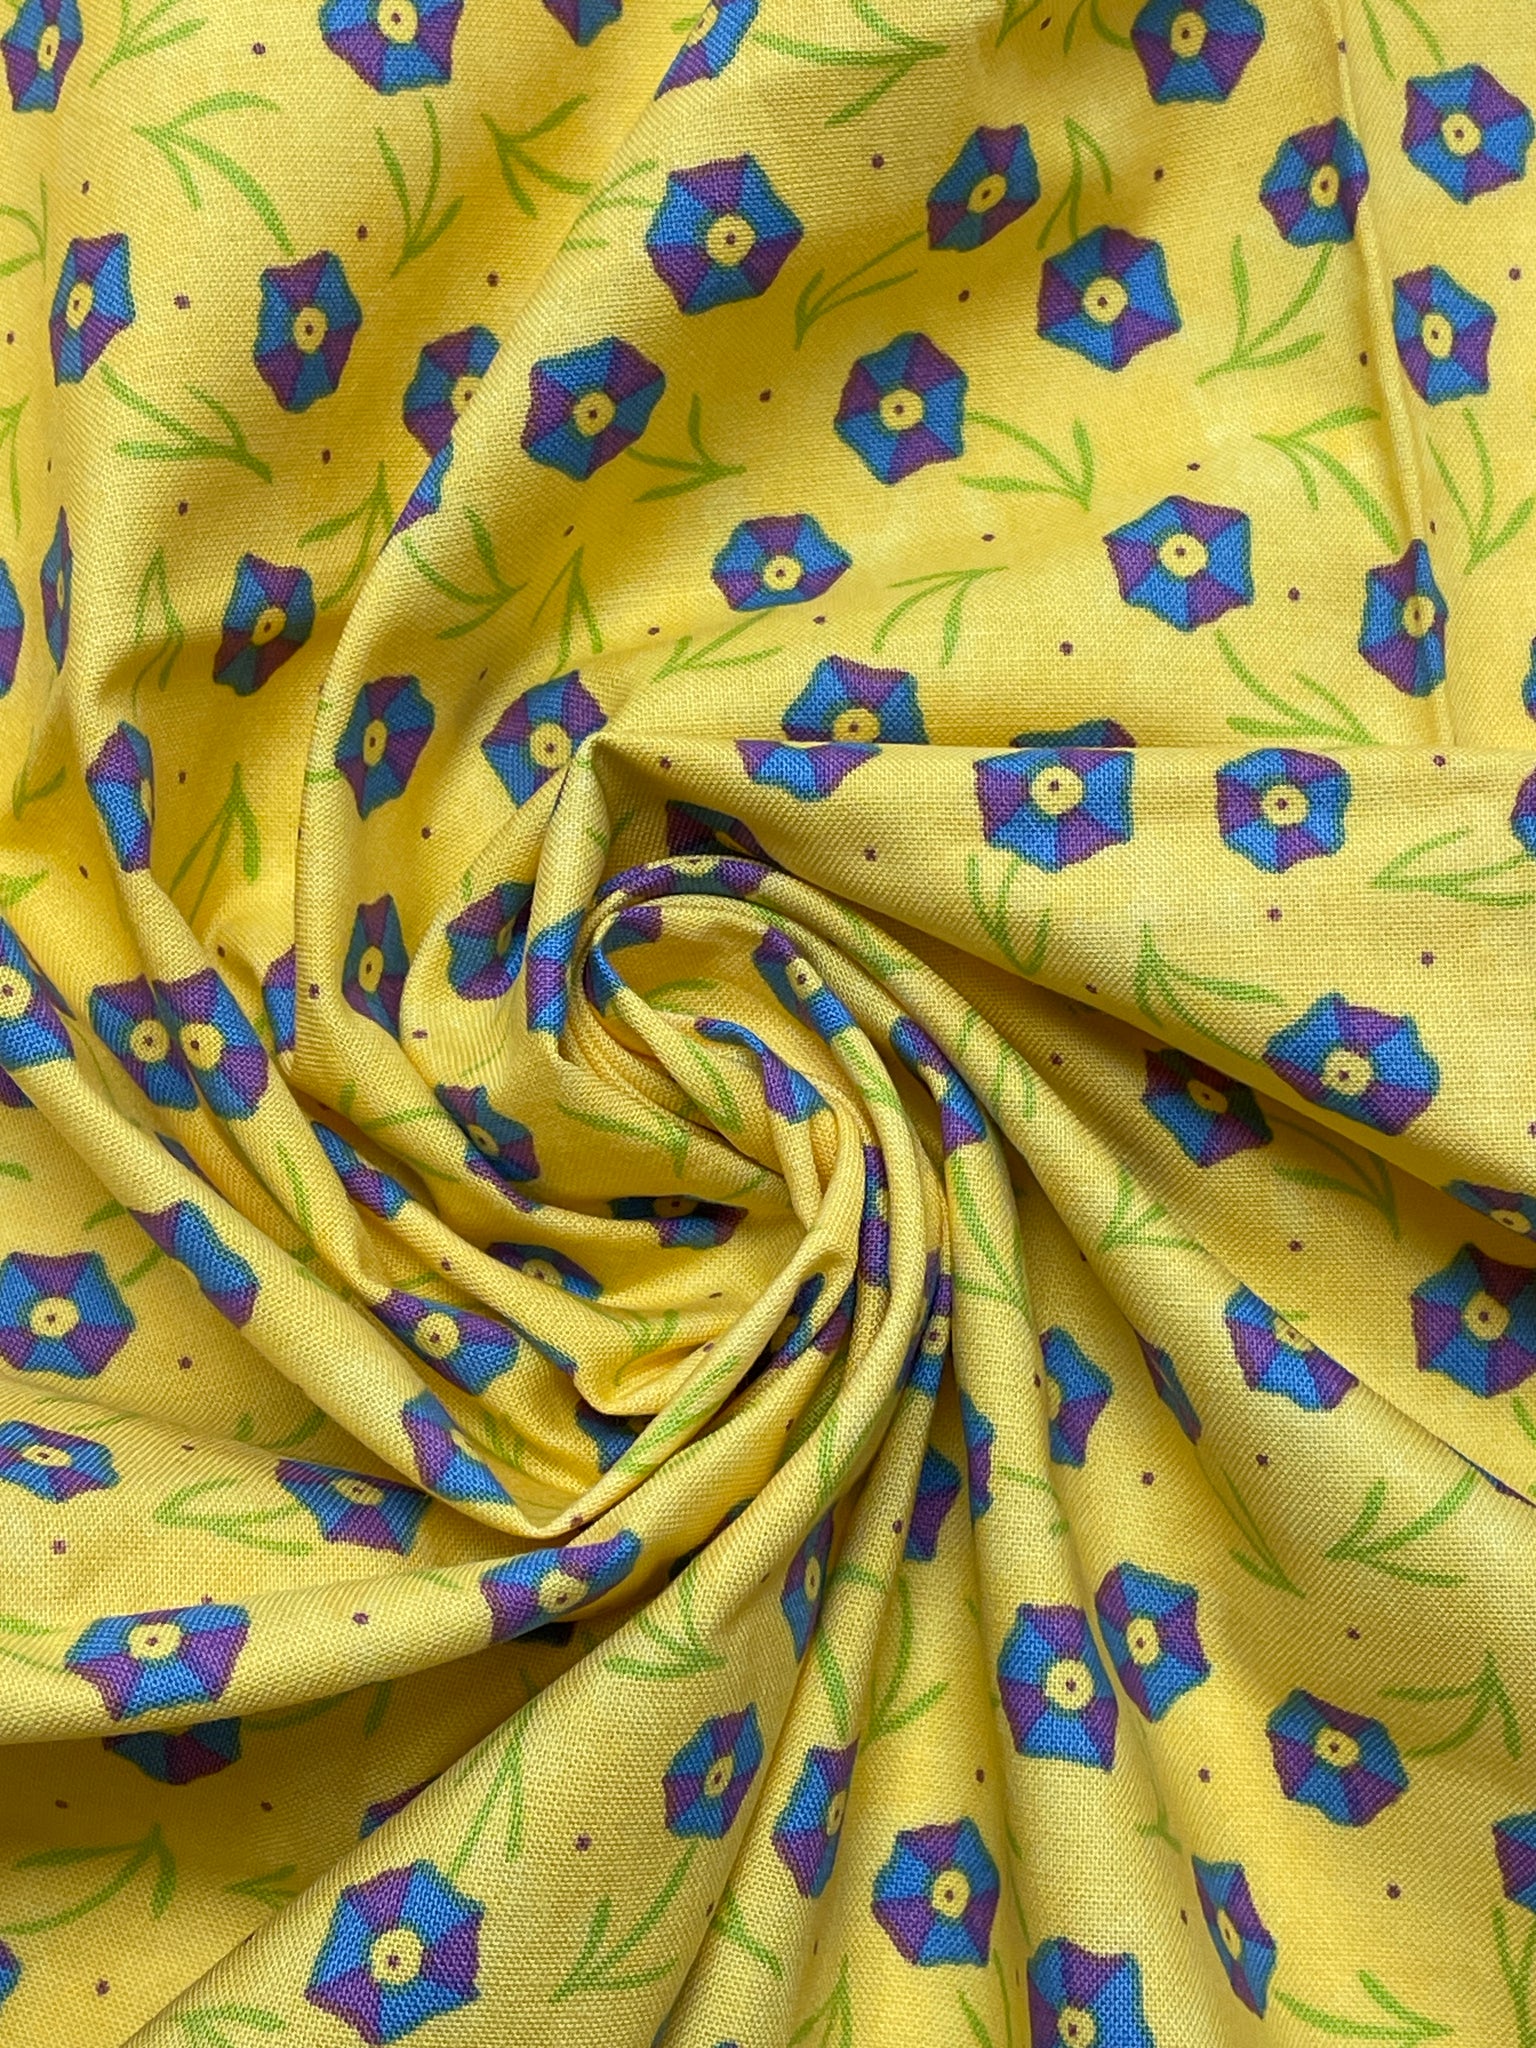 2 YD Quilting Cotton - Yellow with Morning Glory Flowers